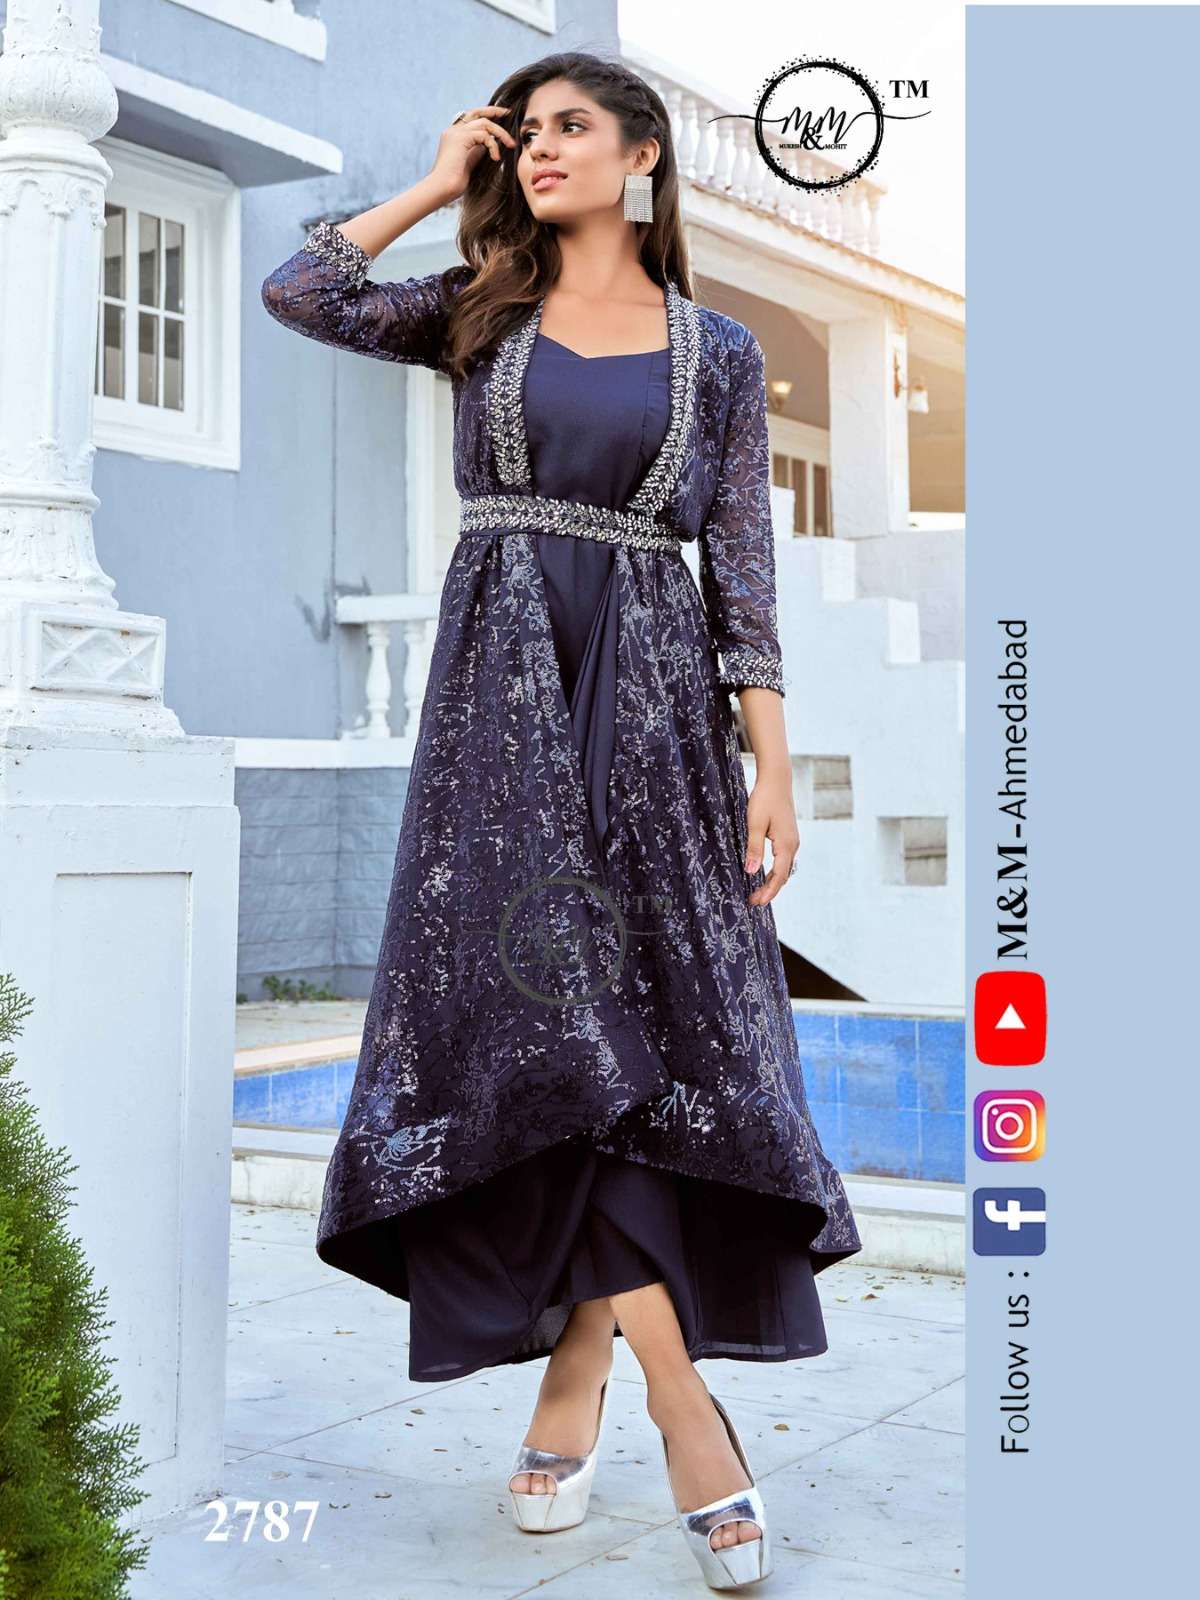 m n m  new launch festive special collection now ready to dispatch get charming look from the m n m menu cuz thats so cossy thats so la la la presenting party wear special by m n m 